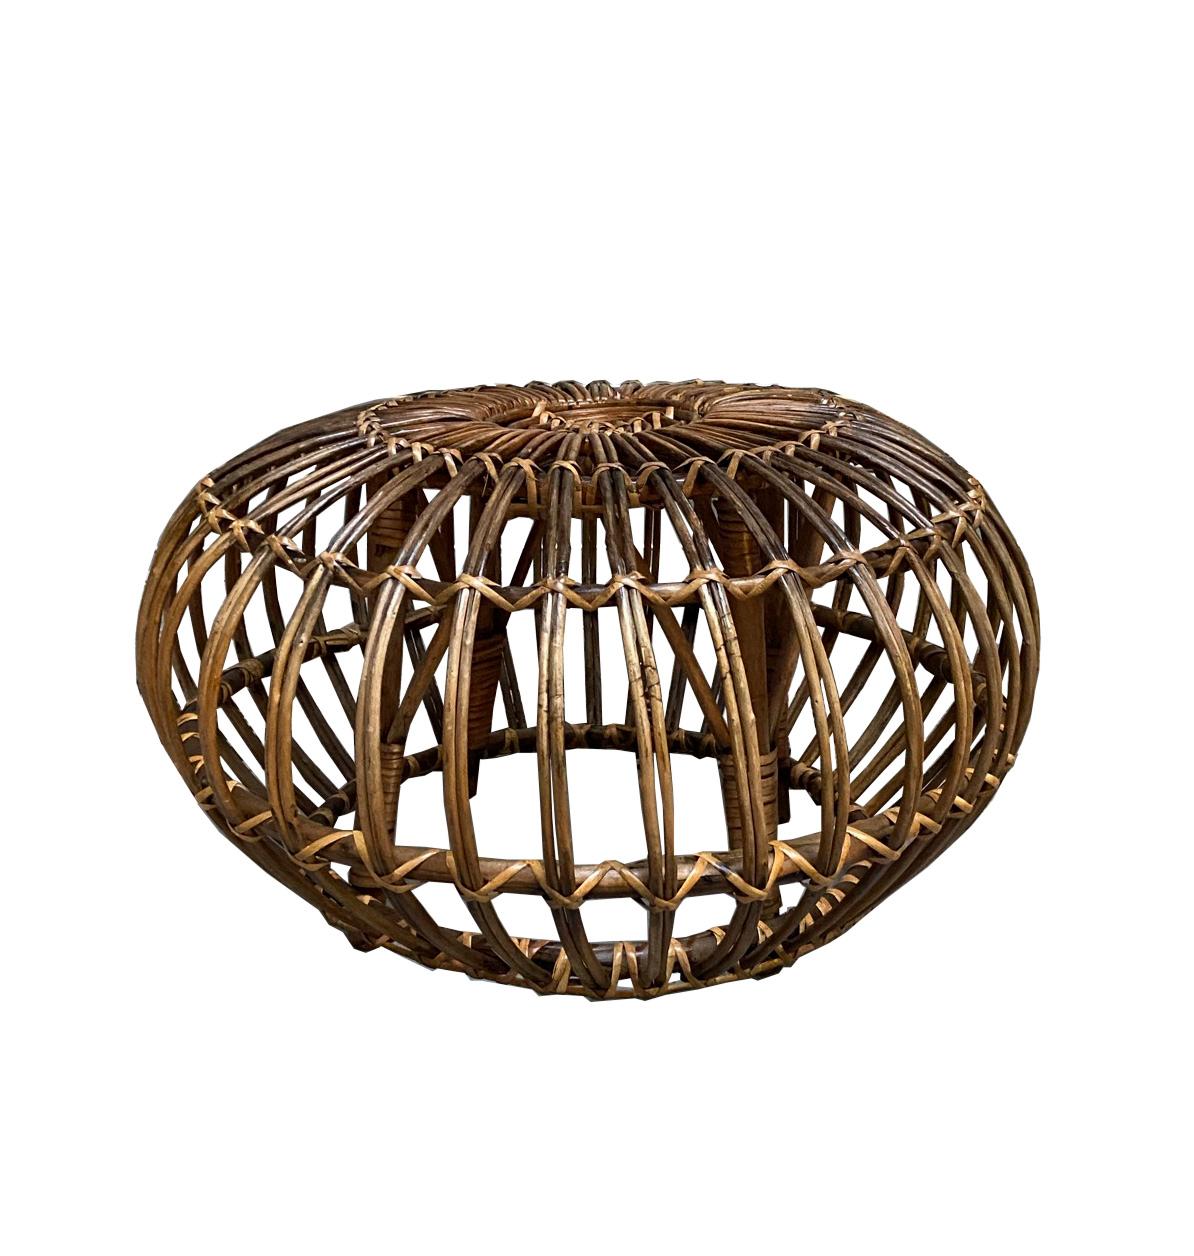 Round handwoven rattan, wicker ottoman, pouf, footstool or side table in the style of Franco Albini. 
Exemplary construction, woven ties are firmly linked.
An iconic design Classic made in Italy.